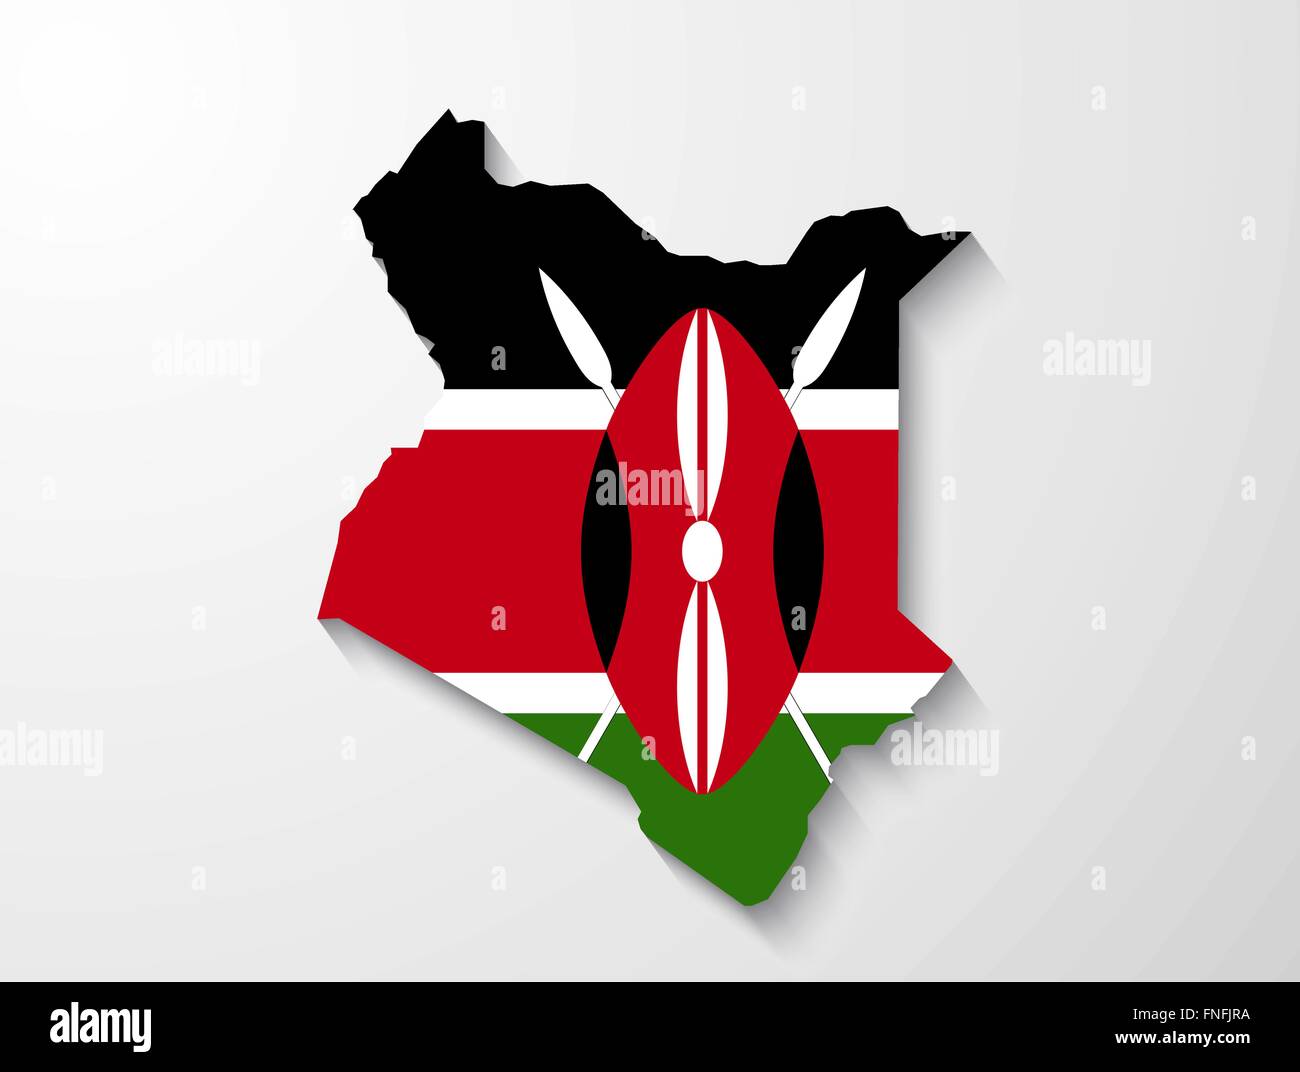 Kenya country map with flag and shadow effect presentation Stock Vector